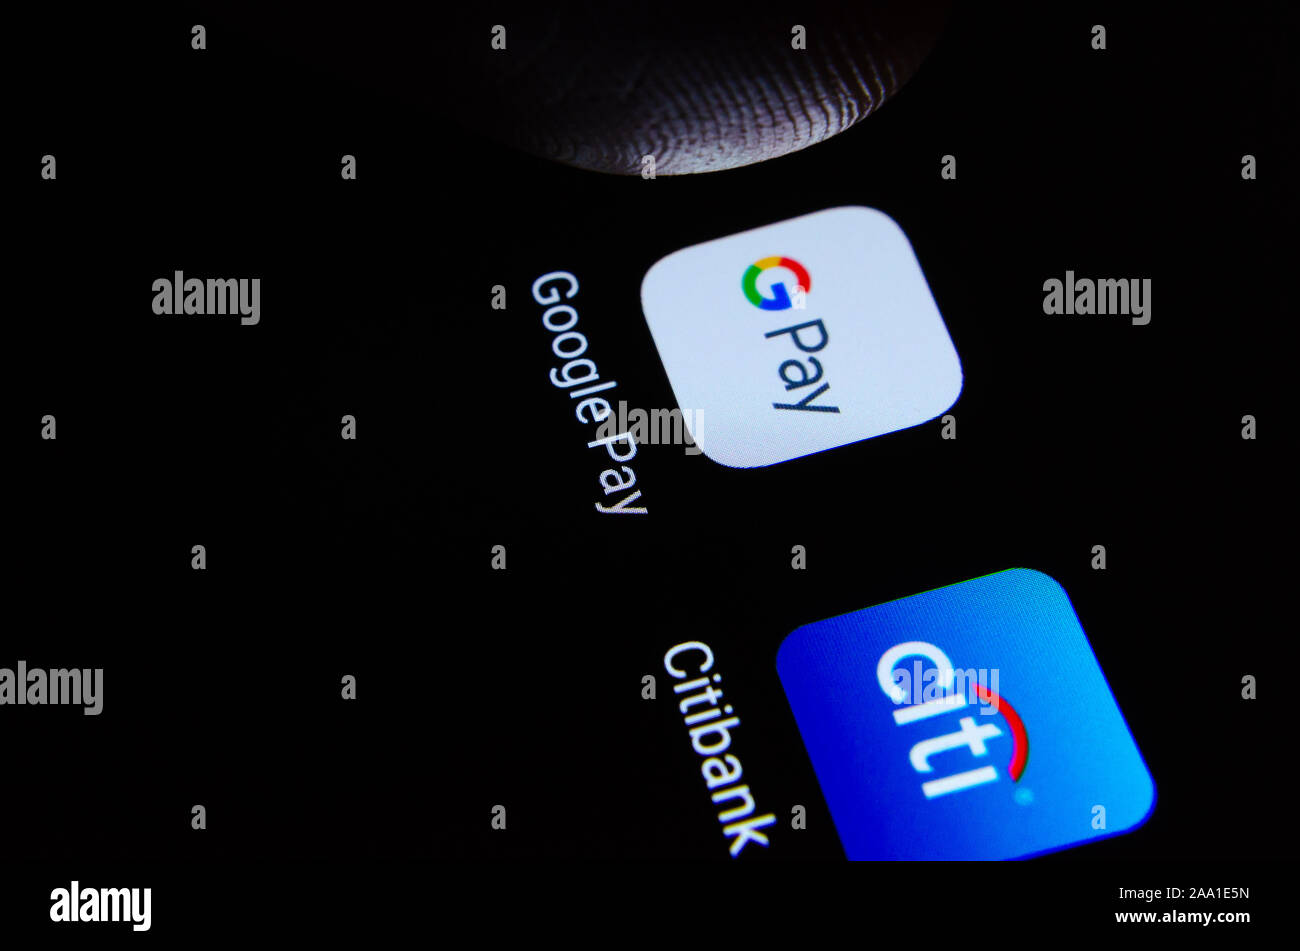 Google Pay and Citibank apps on smartphone with a fingertip over Google Pay. Illustrative for Google and Citibank partnership. Selective focus Stock Photo